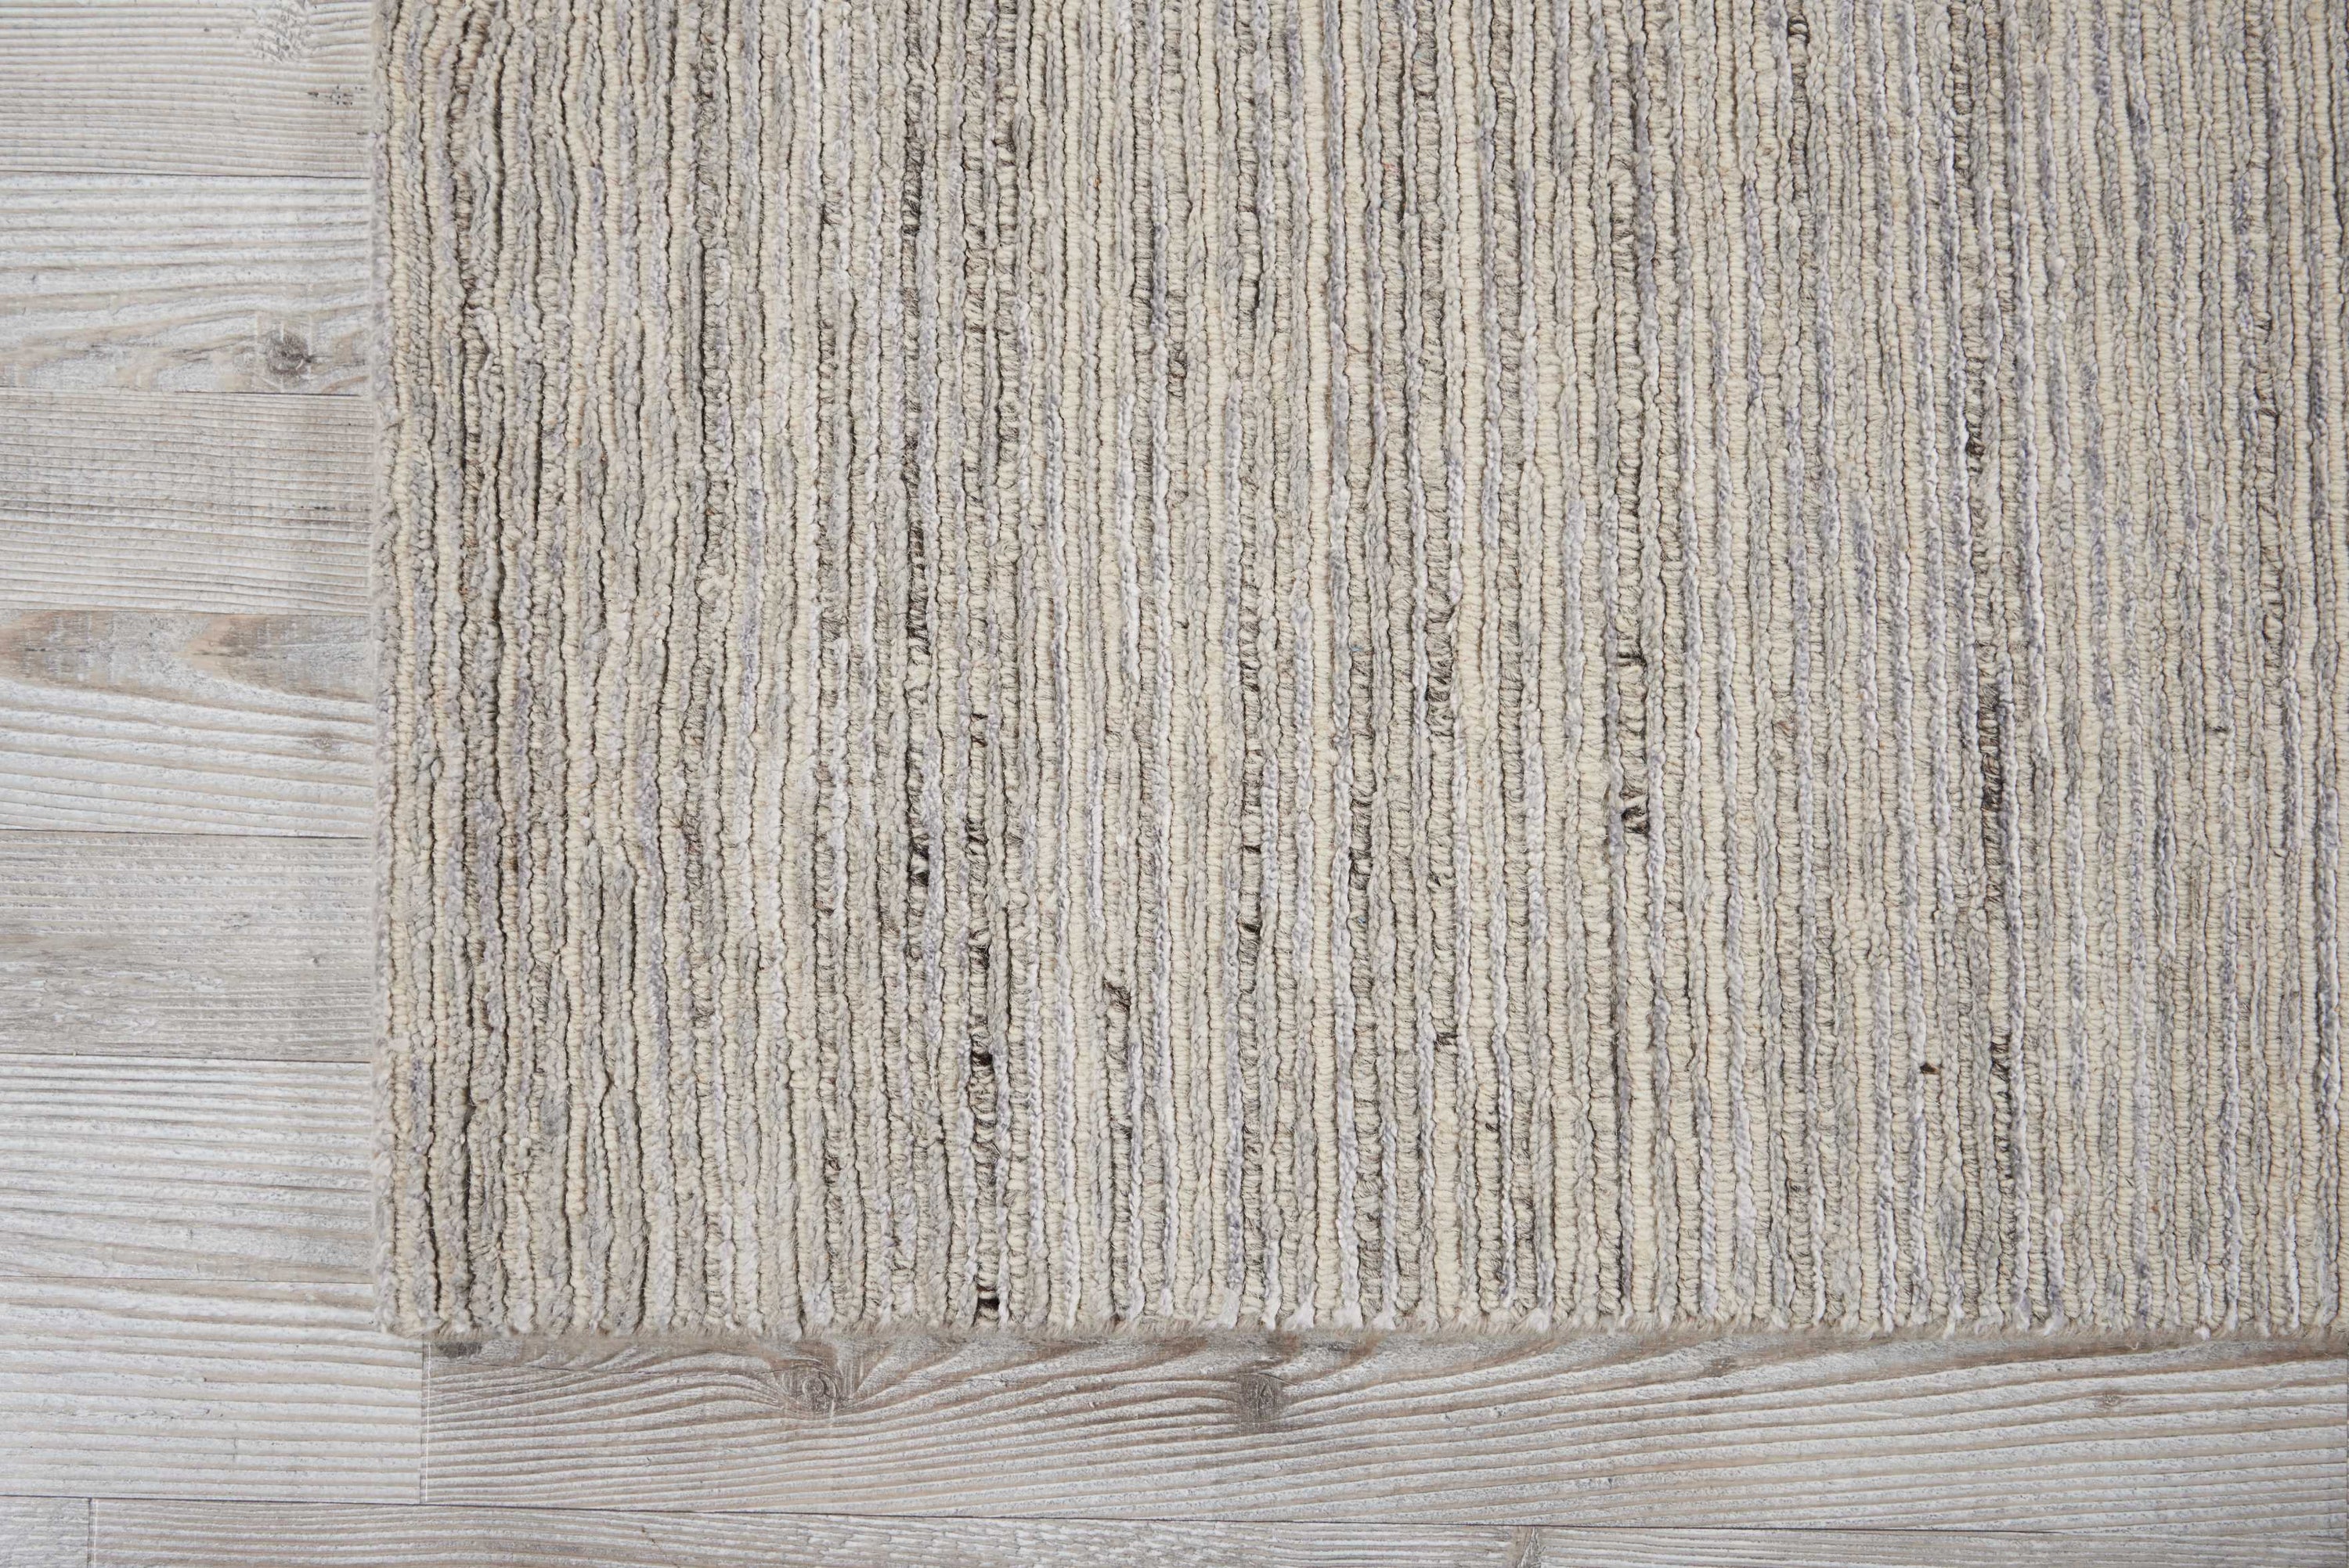 Textured fabric rug on wooden floor adds cozy rustic charm.